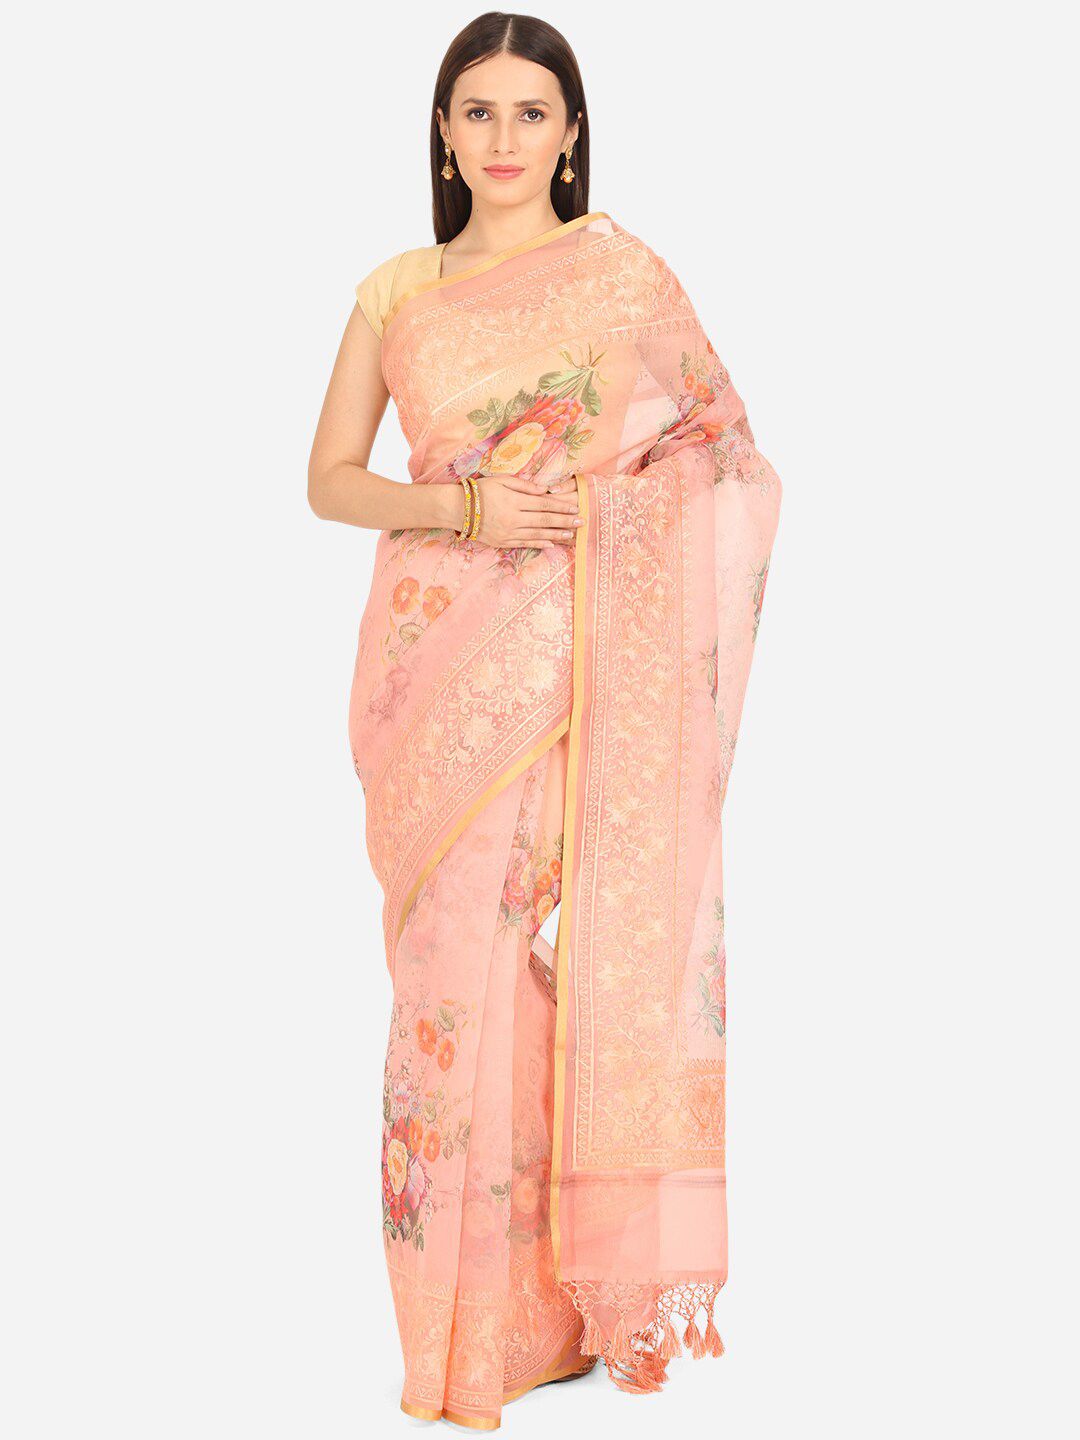 BOMBAY SELECTIONS Peach-Coloured & Green Floral Organza Saree Price in India